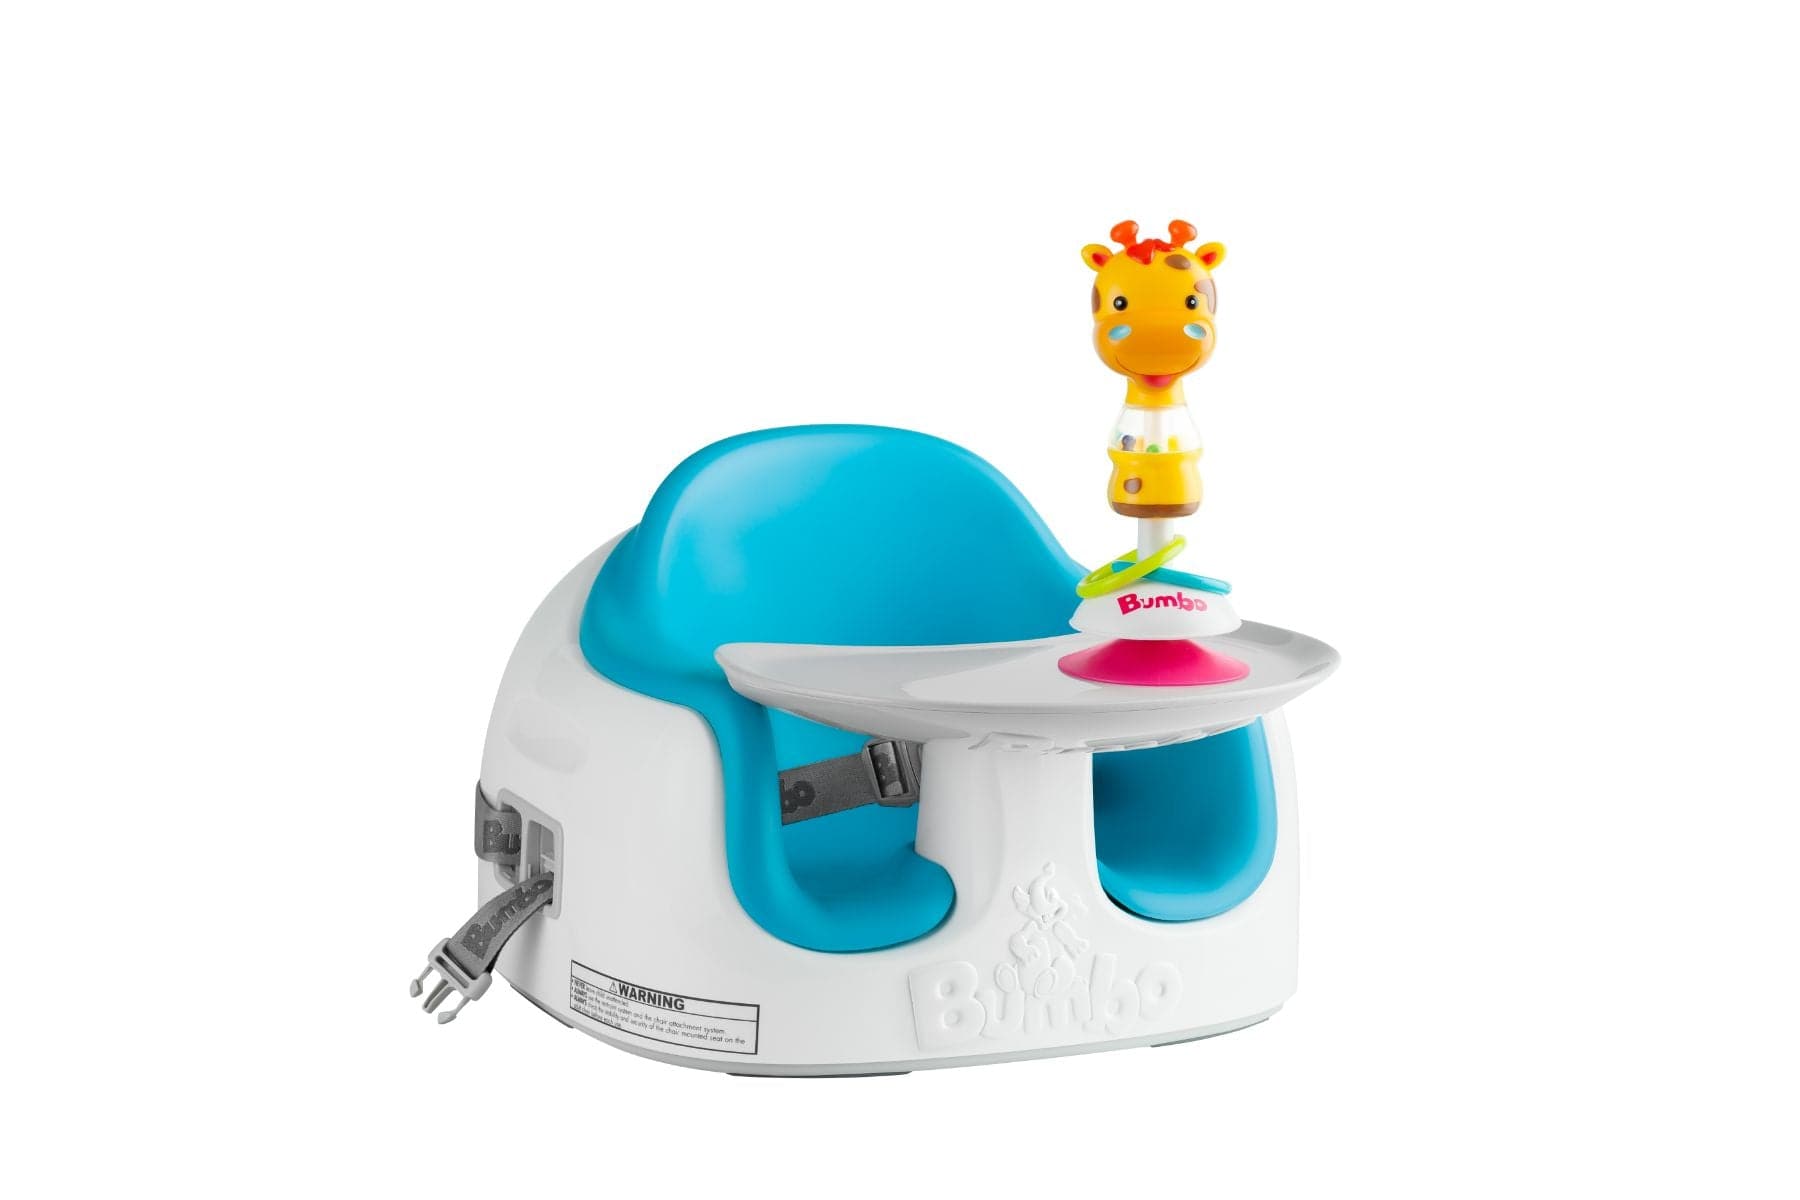 Bumbo Suction Toy - Gwen The Giraffe -  | For Your Little One